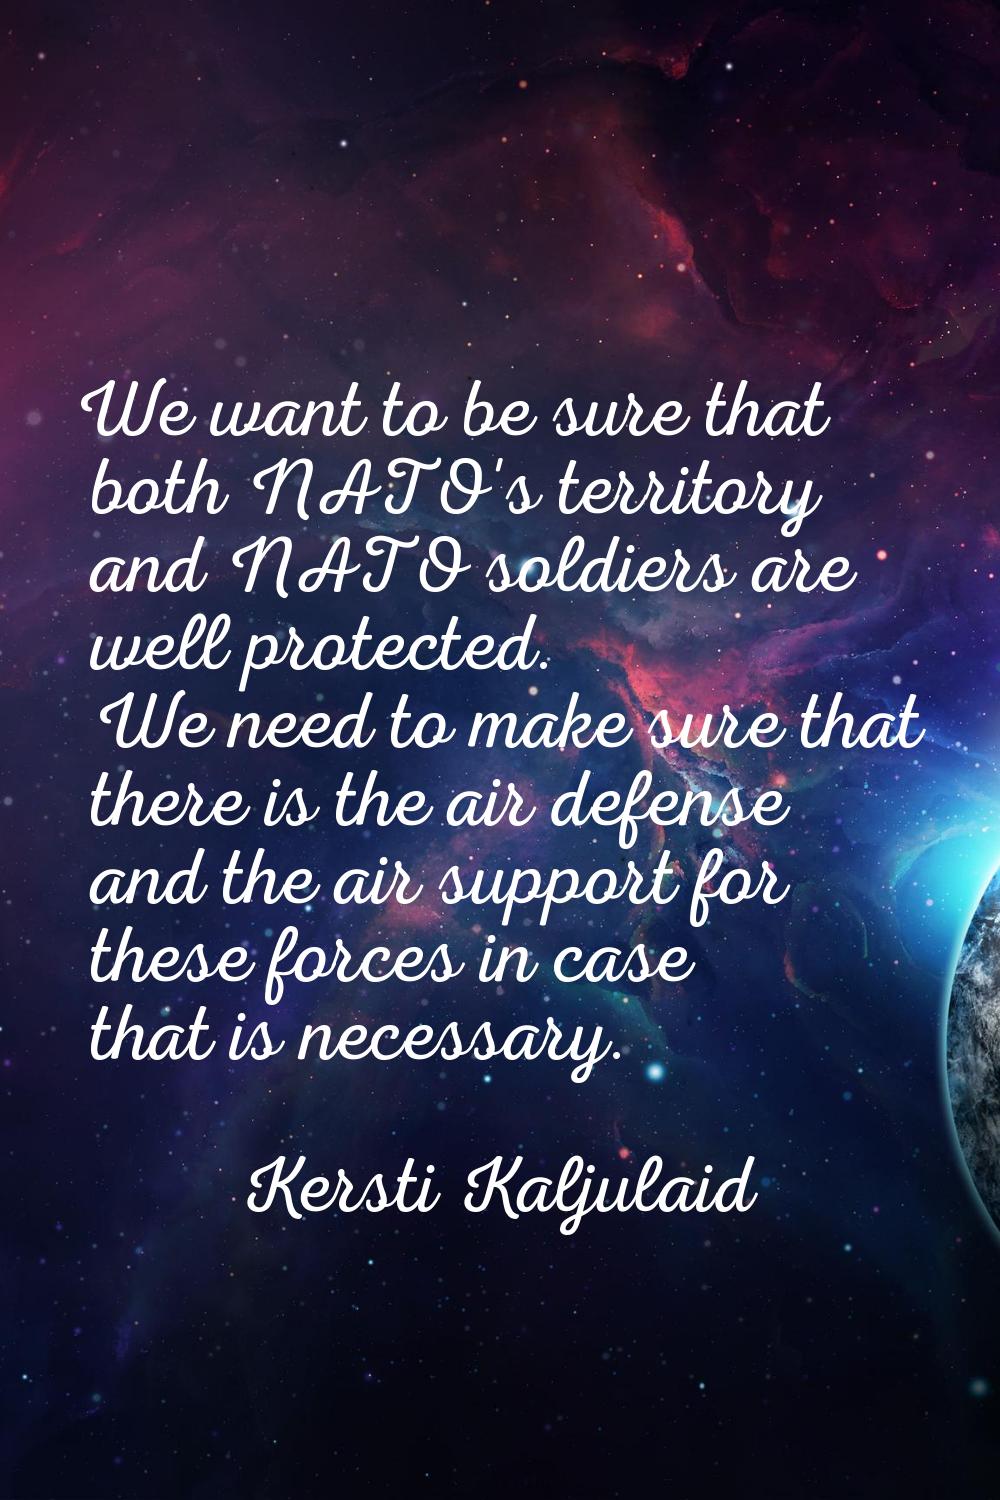 We want to be sure that both NATO's territory and NATO soldiers are well protected. We need to make